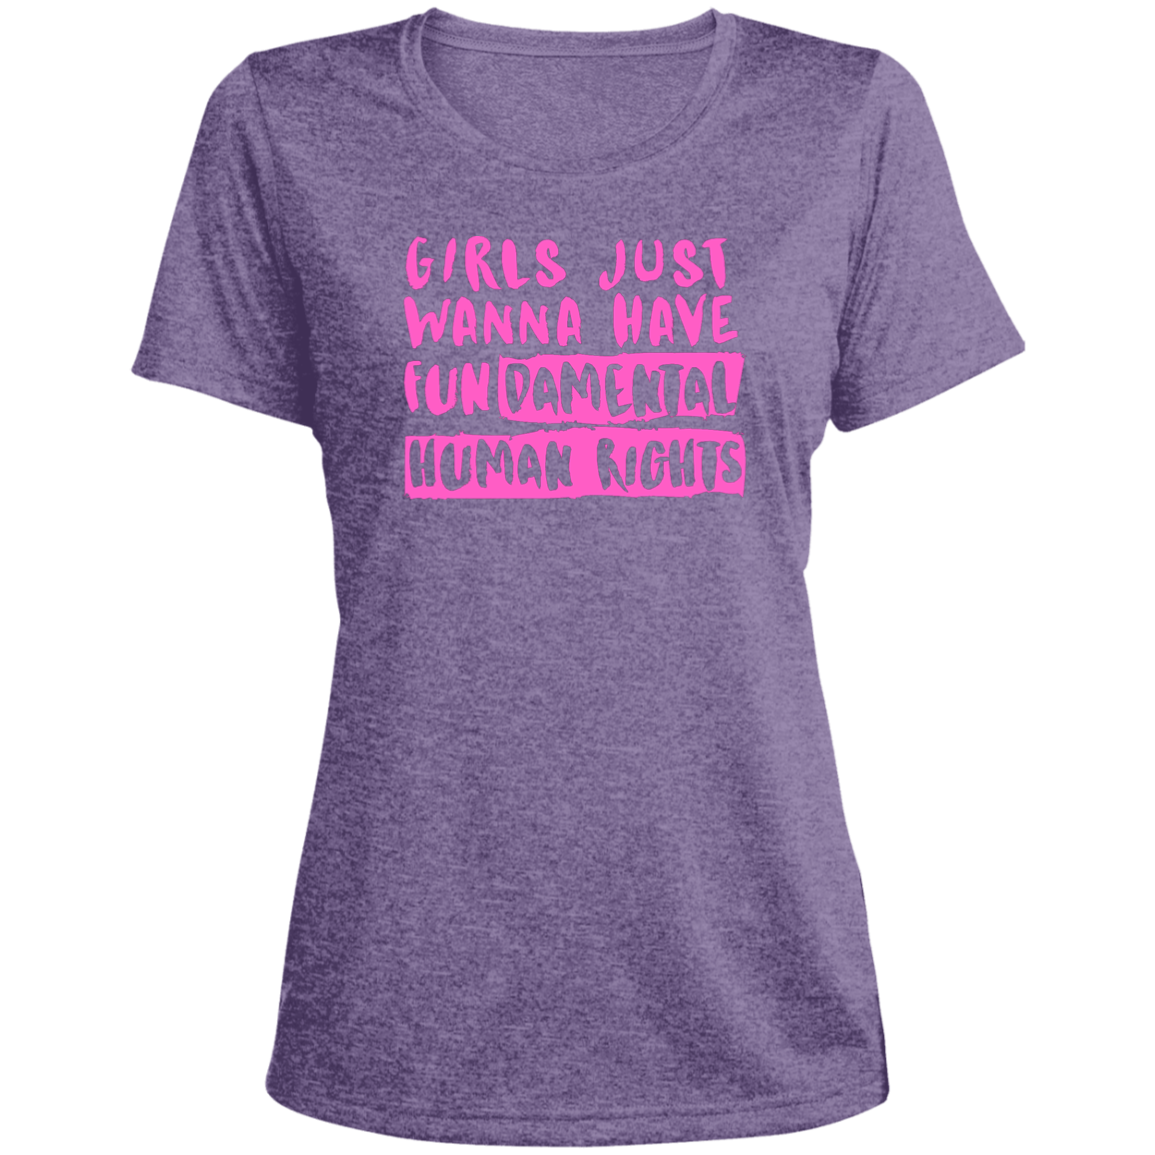 Girls Just Want To Have Fun... Ladies' Heather Scoop Neck Performance Tee